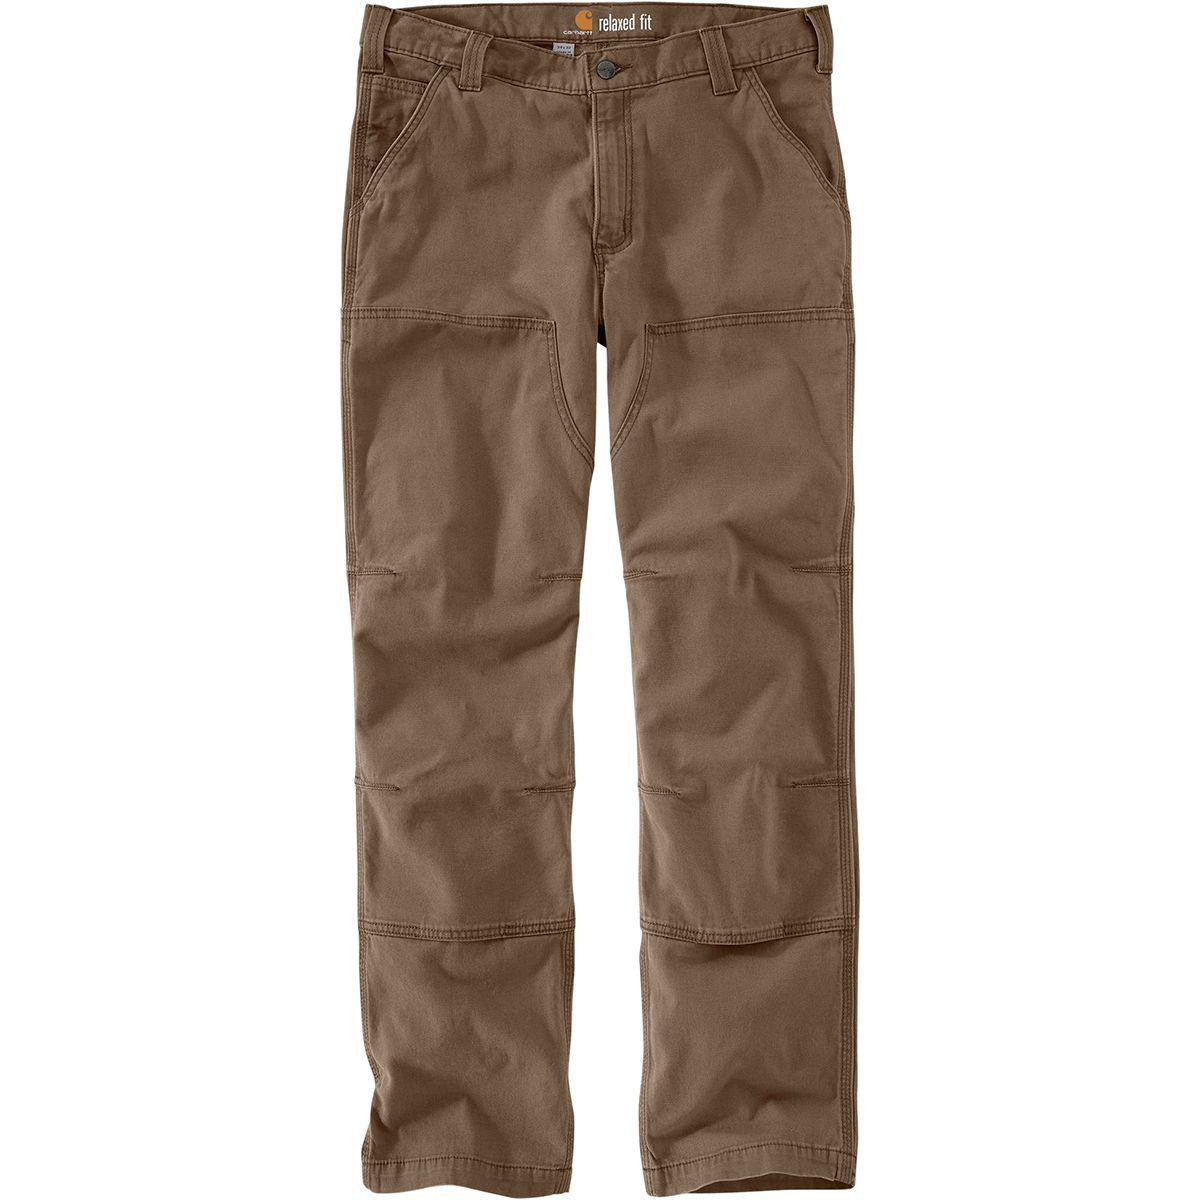 Carhartt Canvas Rugged Flex Upland Field Pant in Brown for Men - Lyst